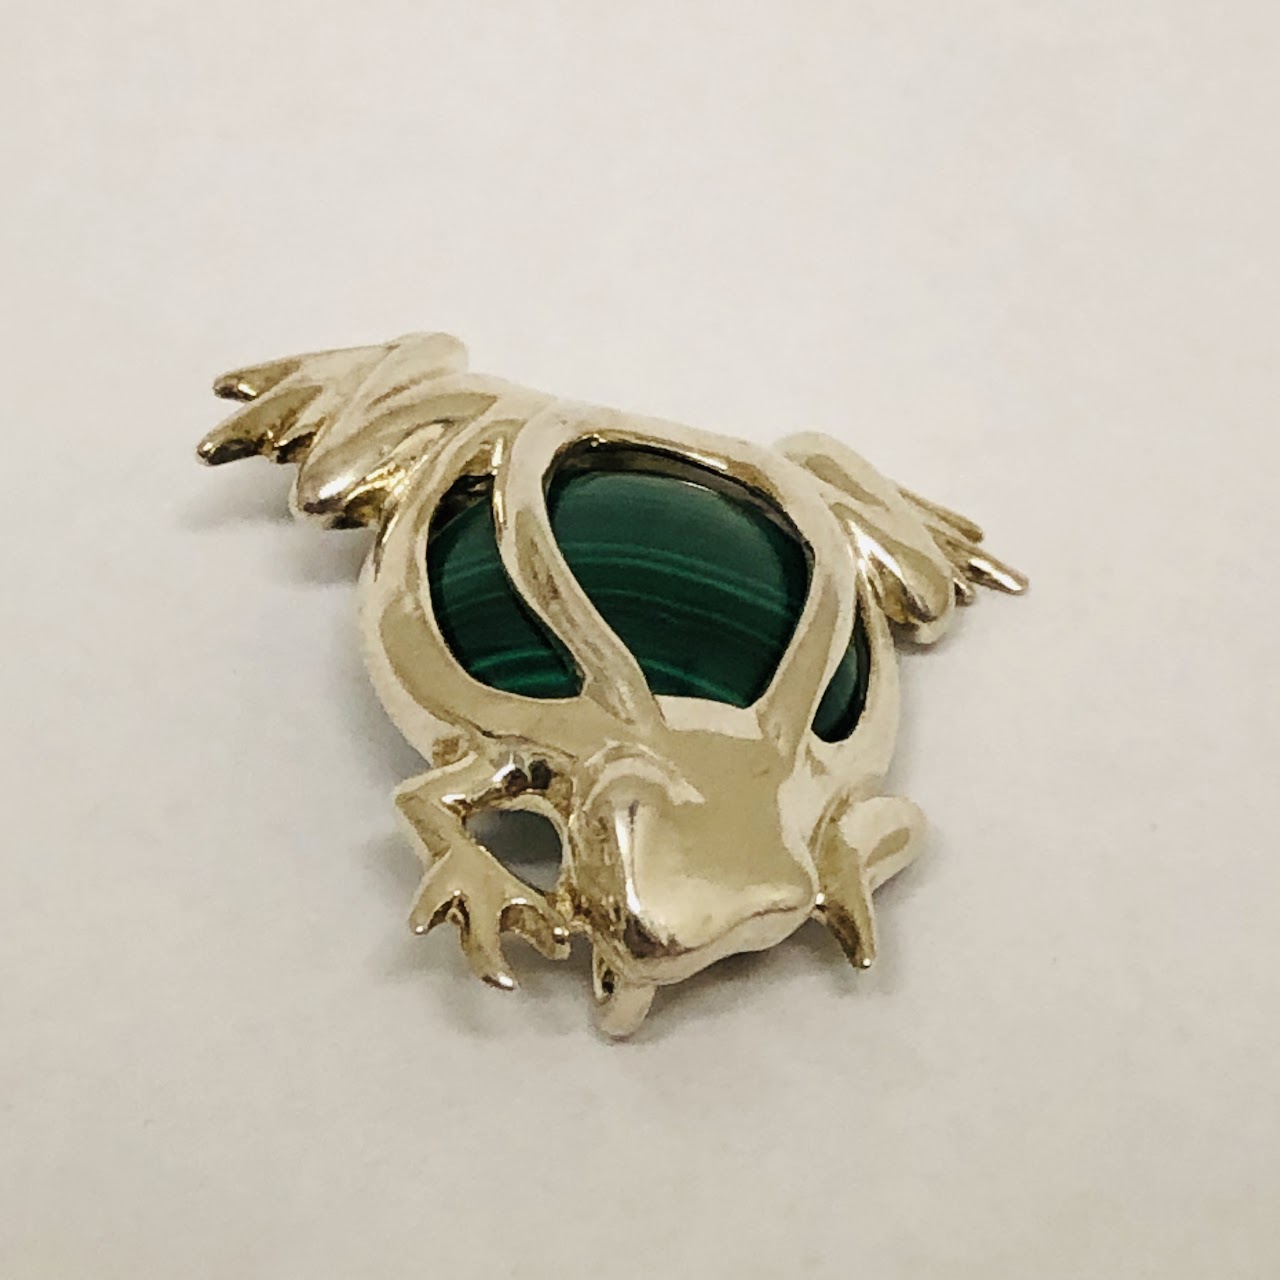 Sterling Silver and Malachite Frog Brooch/Pendant